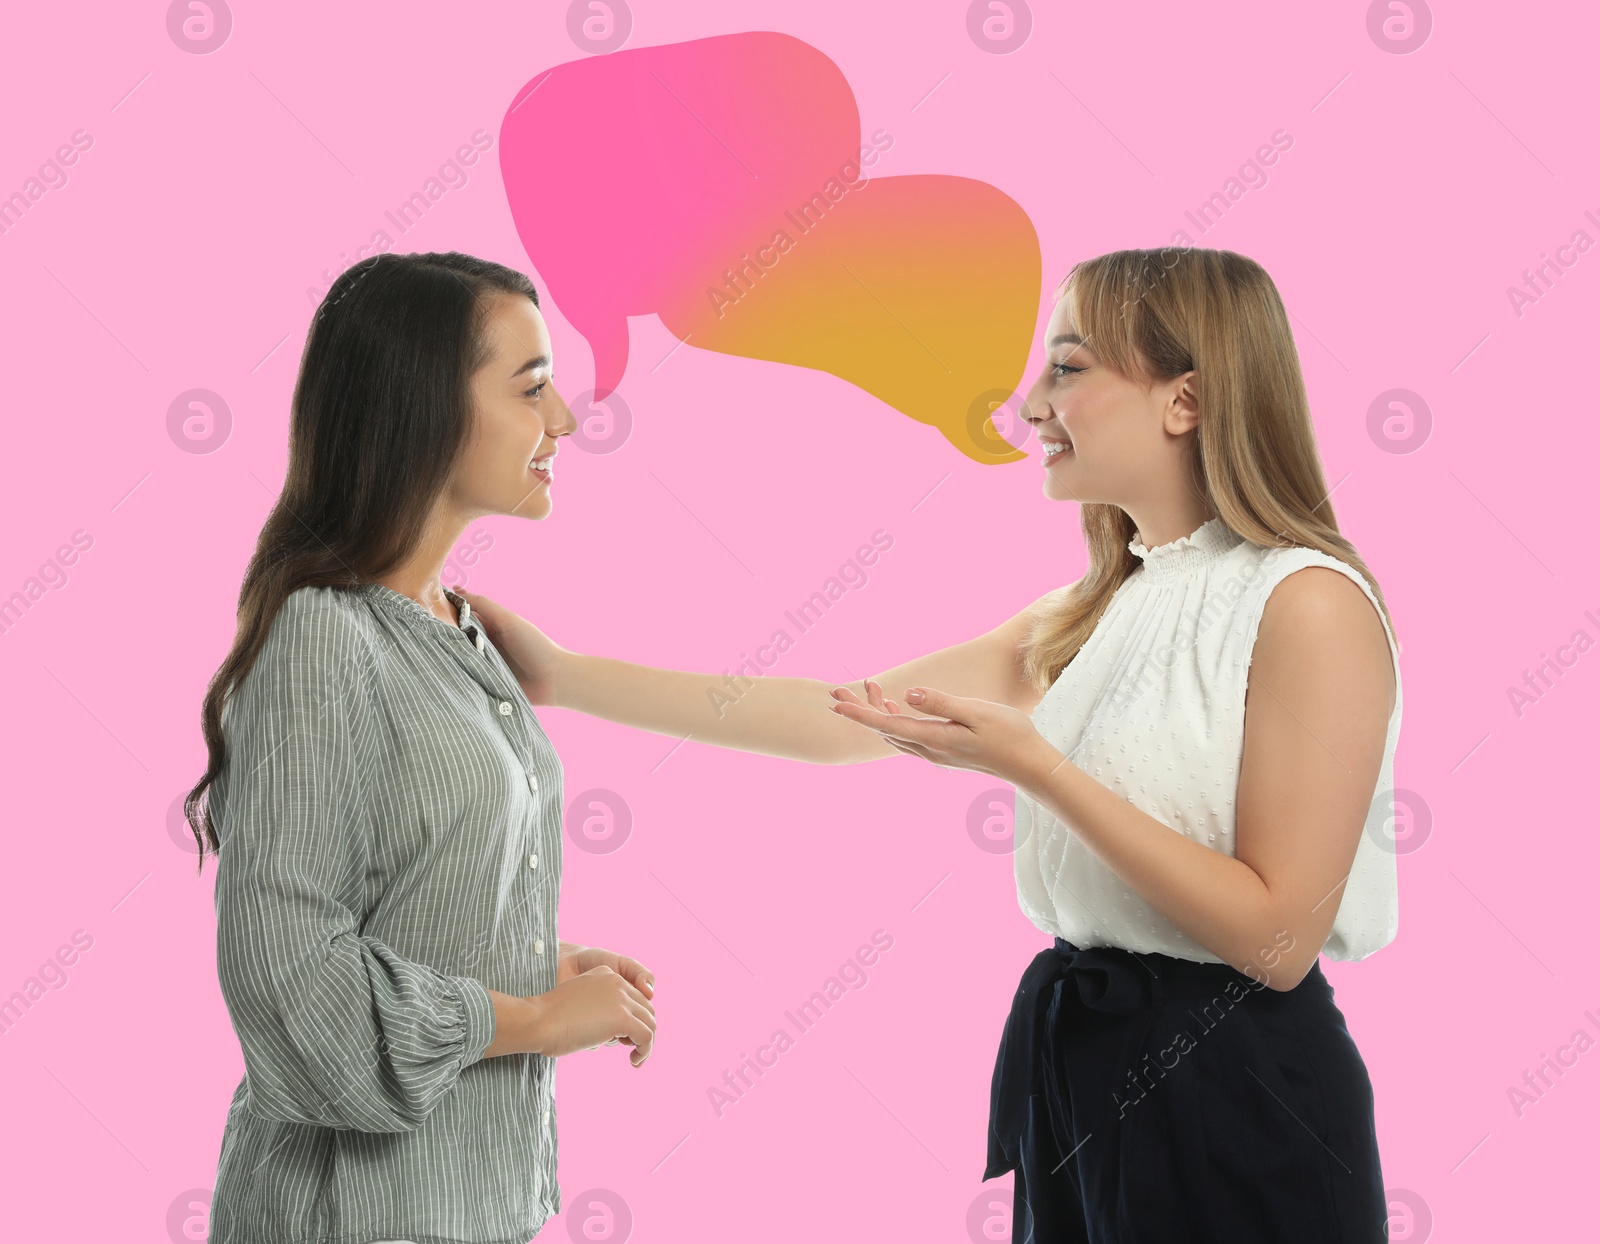 Image of Young women talking on pink background. Dialogue illustration with speech bubbles